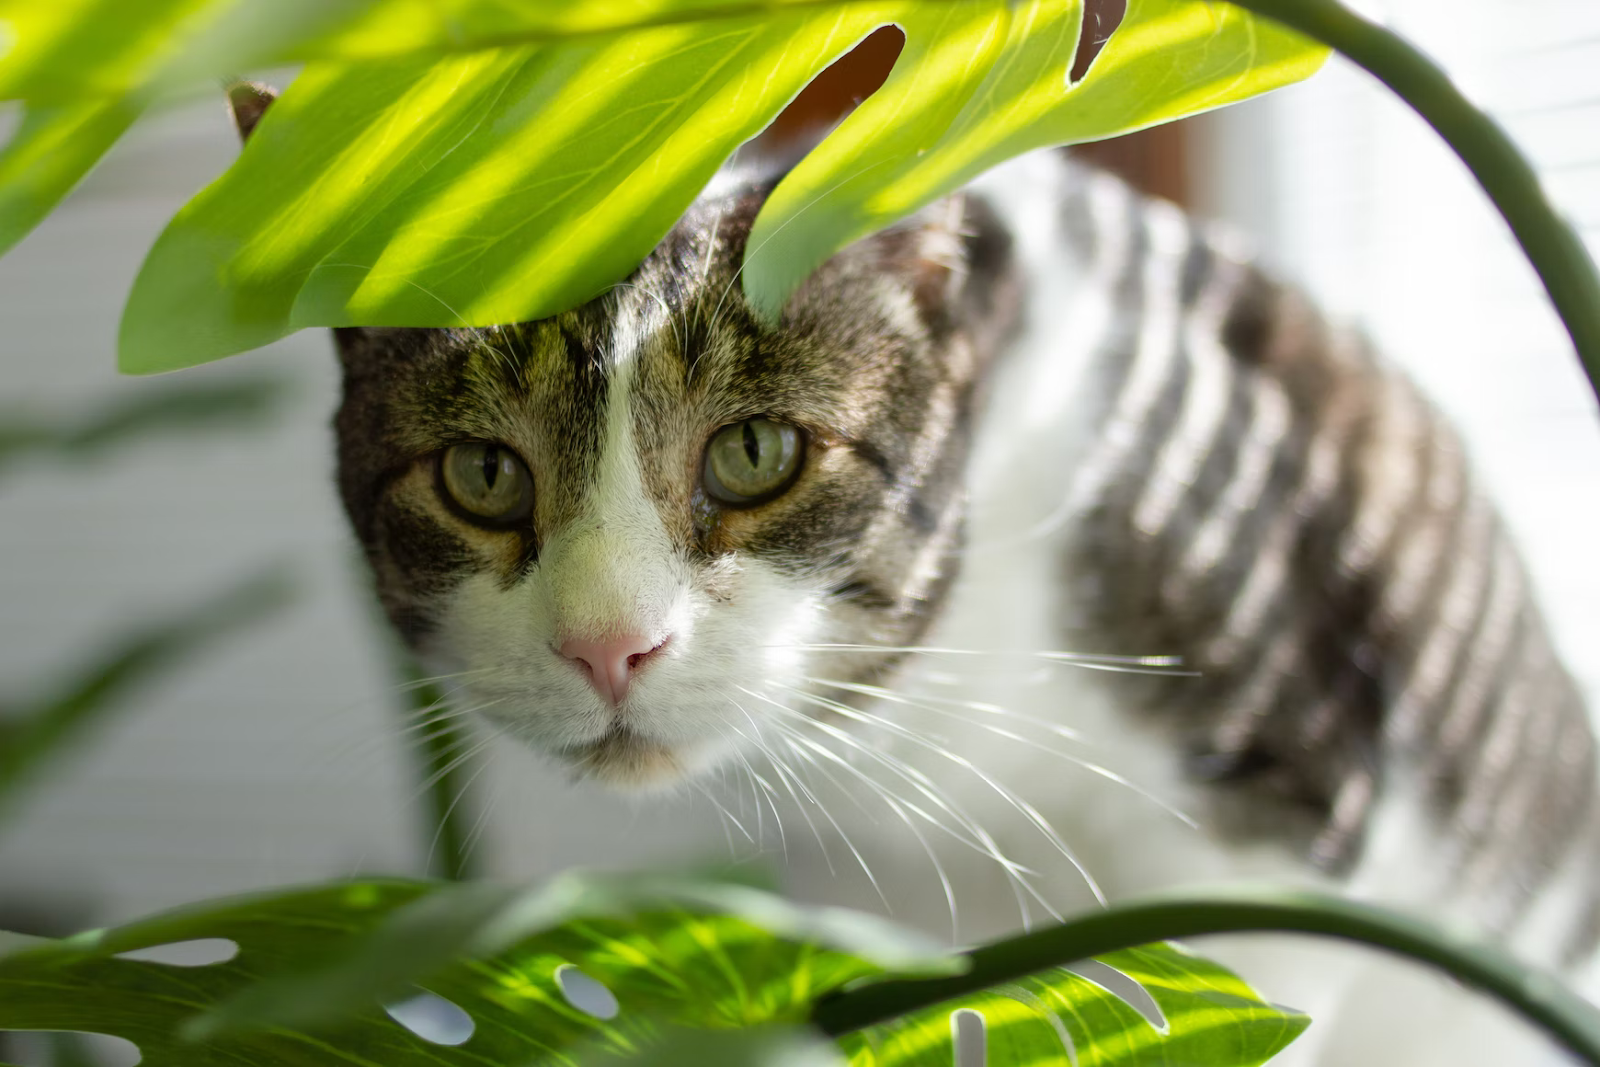 How to Safely Have Plants and Pets